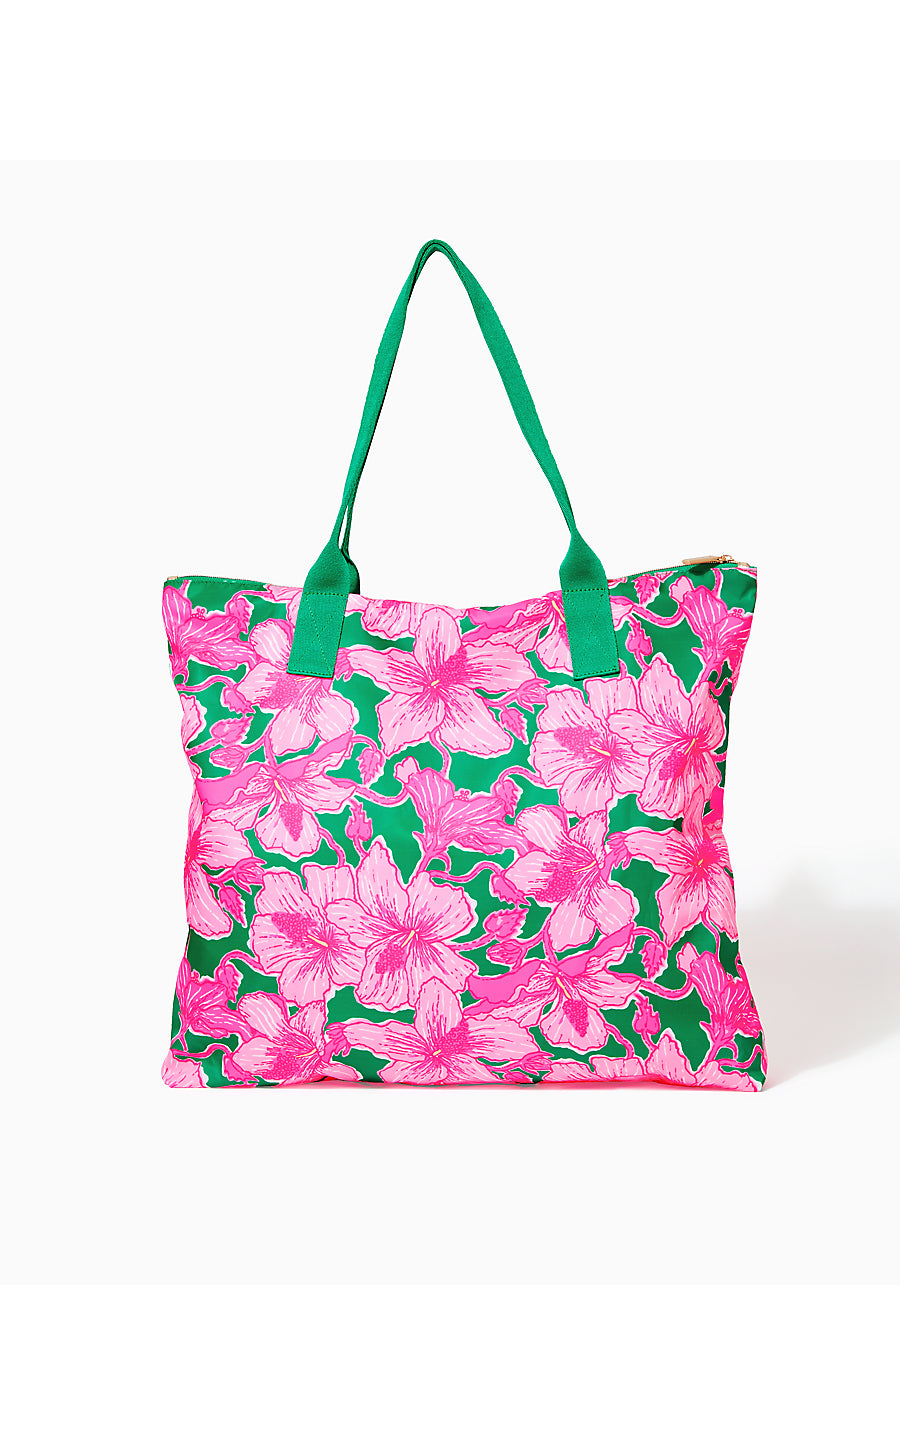 PIPER PACKABLE TOTE, KELLY GREEN HIBIS KISS